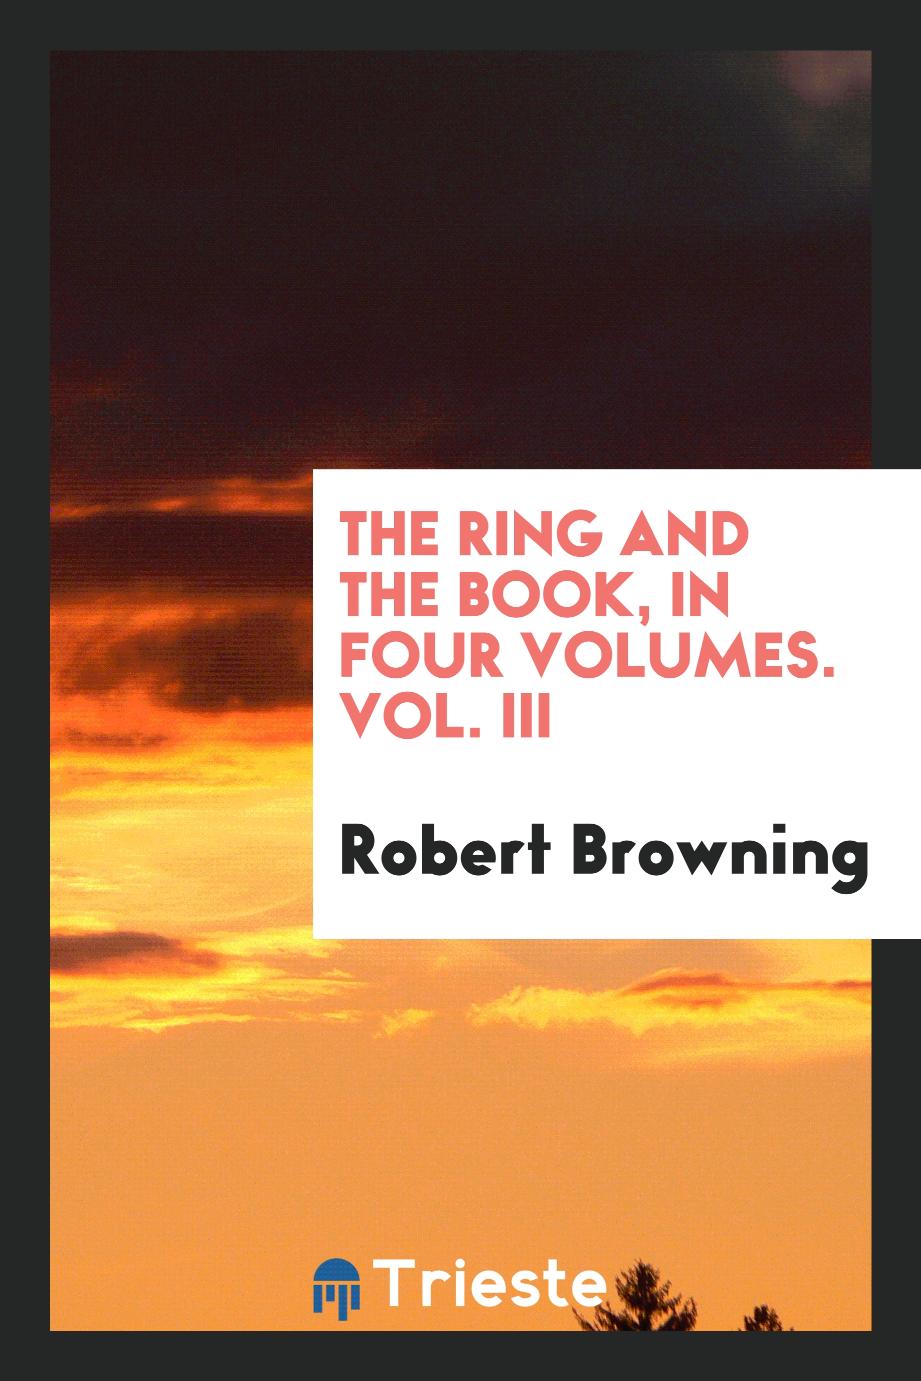 The ring and the book, in four volumes. Vol. III